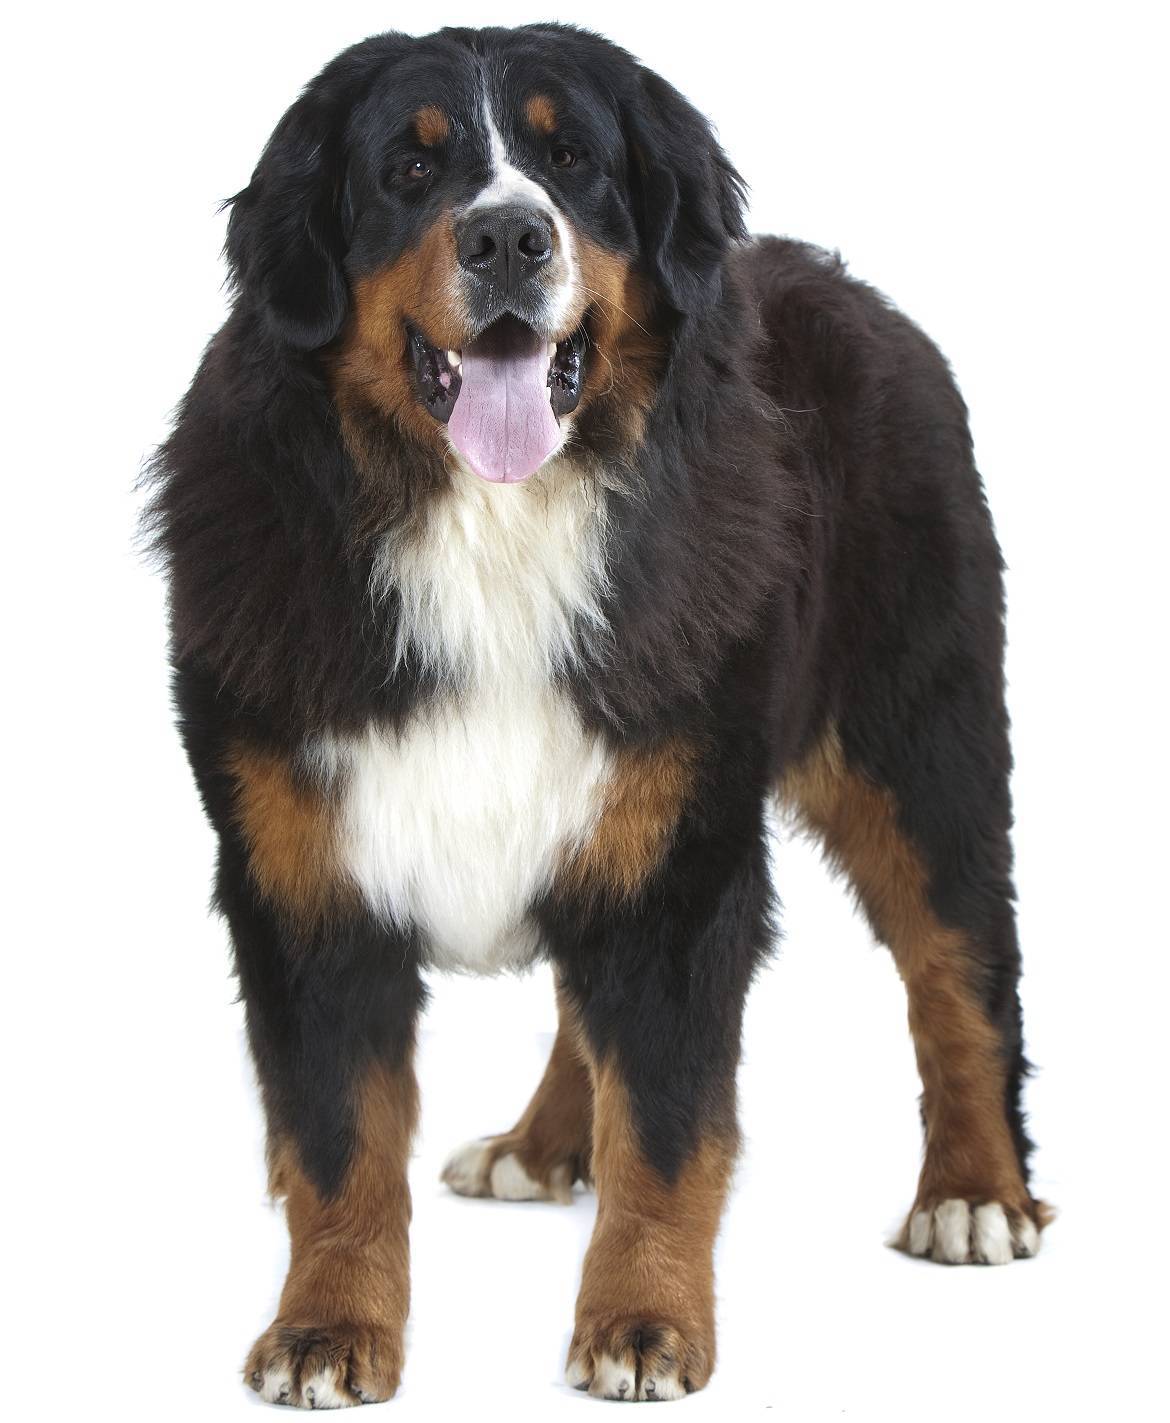 Greater Swiss Mountain Dog Breed